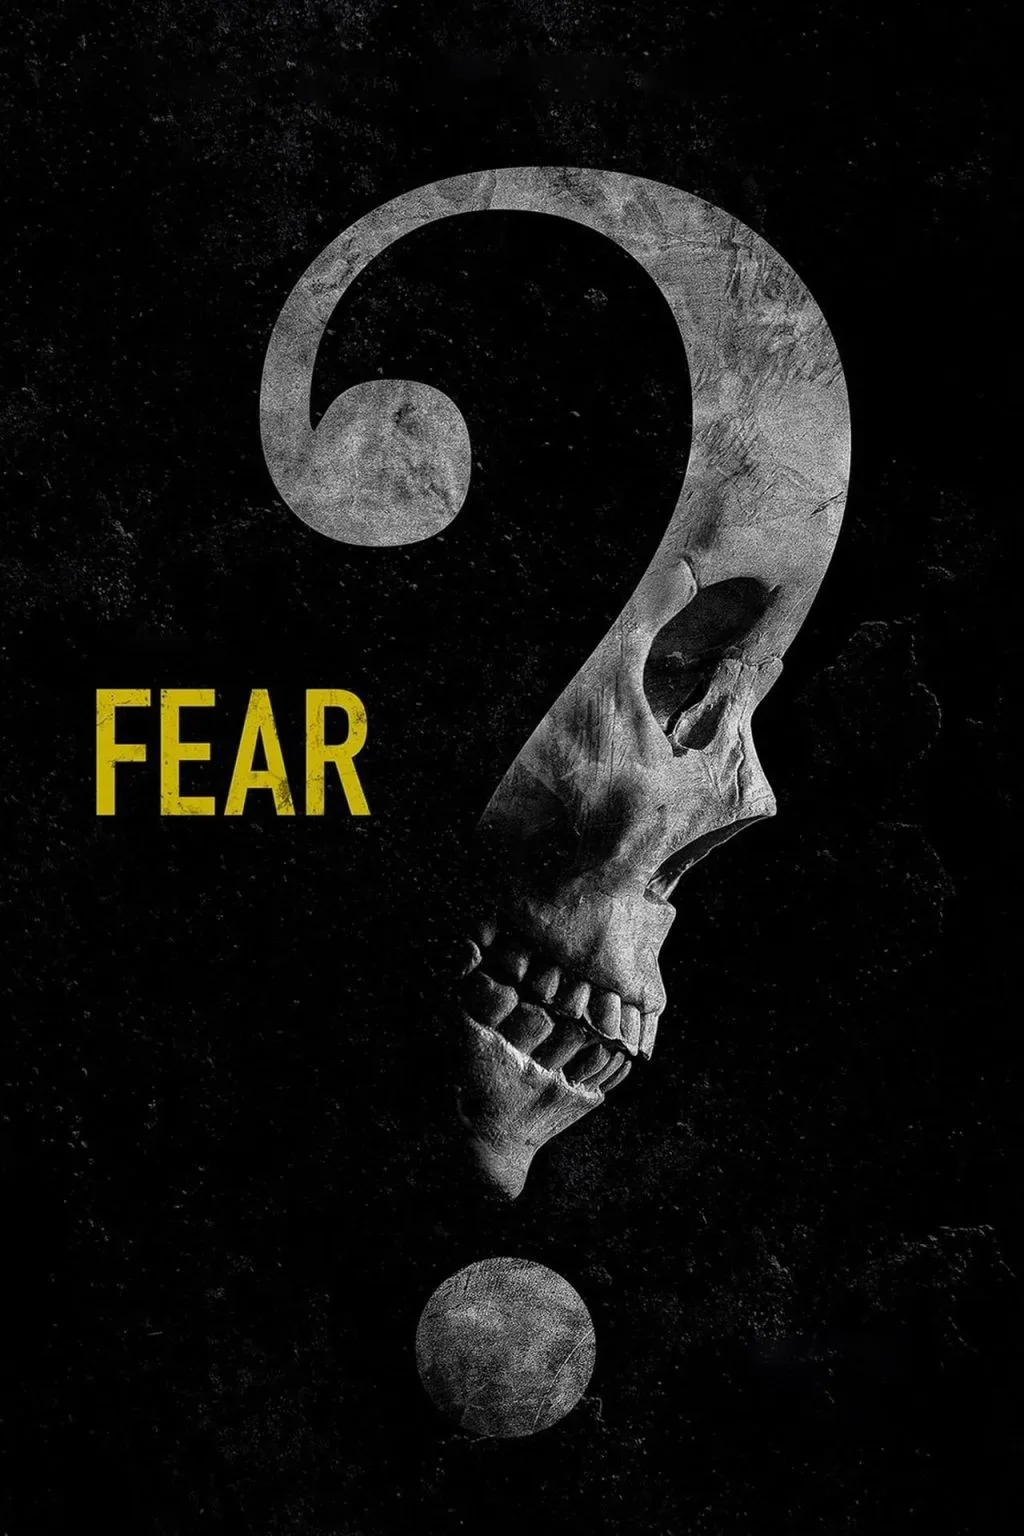 In the movie Fear - A weekend vacation turns sinister when a group of friends must confront their worst fears one by one.